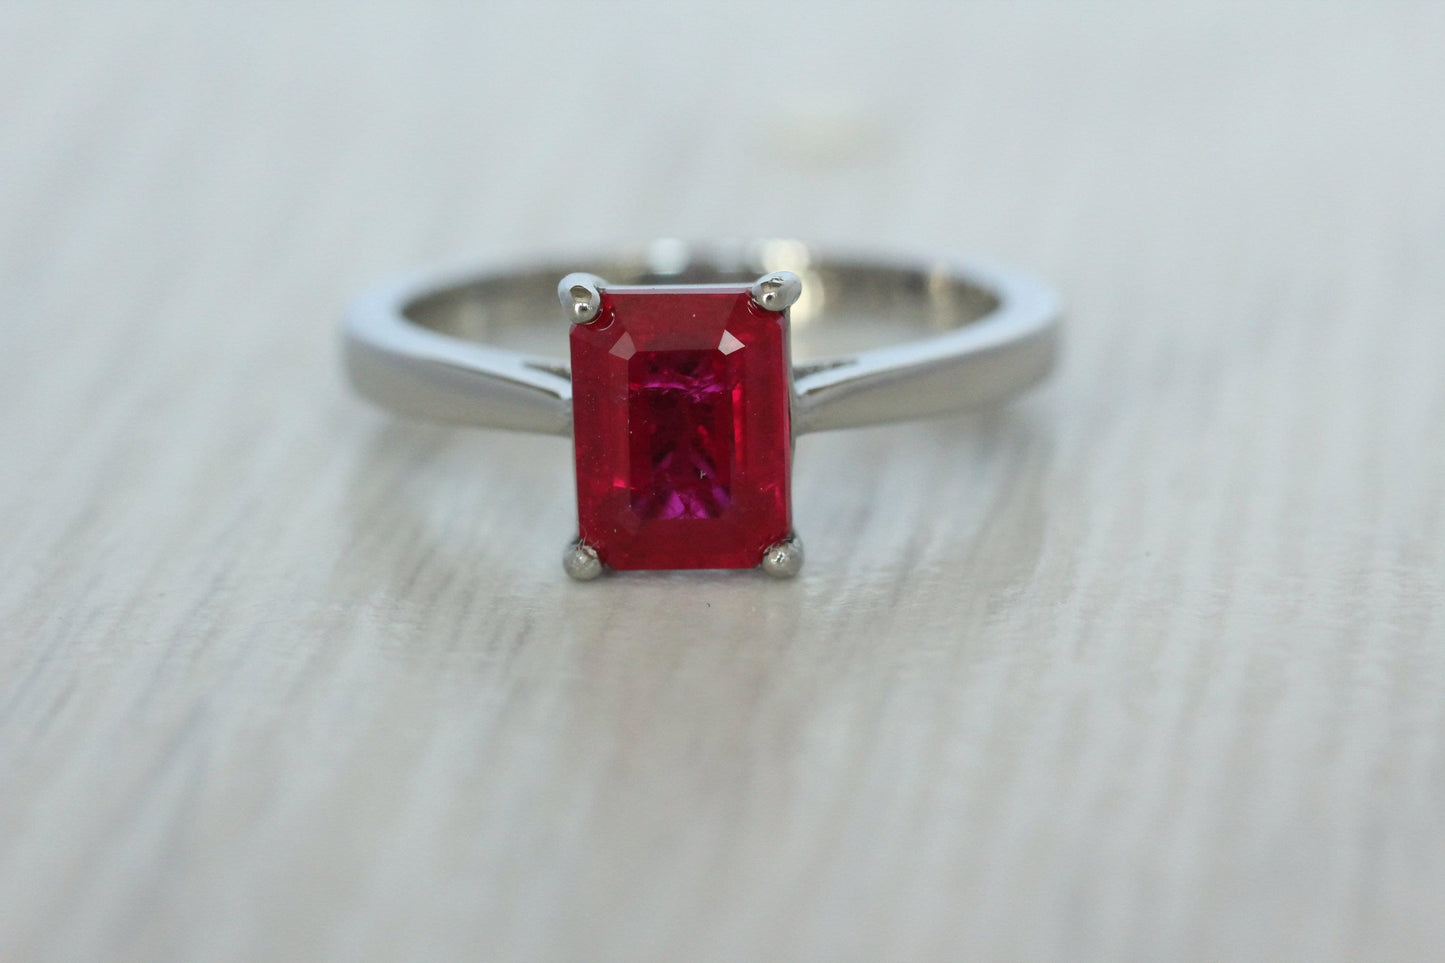 2ct Natural Ruby, Emerald Cut Solitaire cathedral ring in Titanium or White Gold